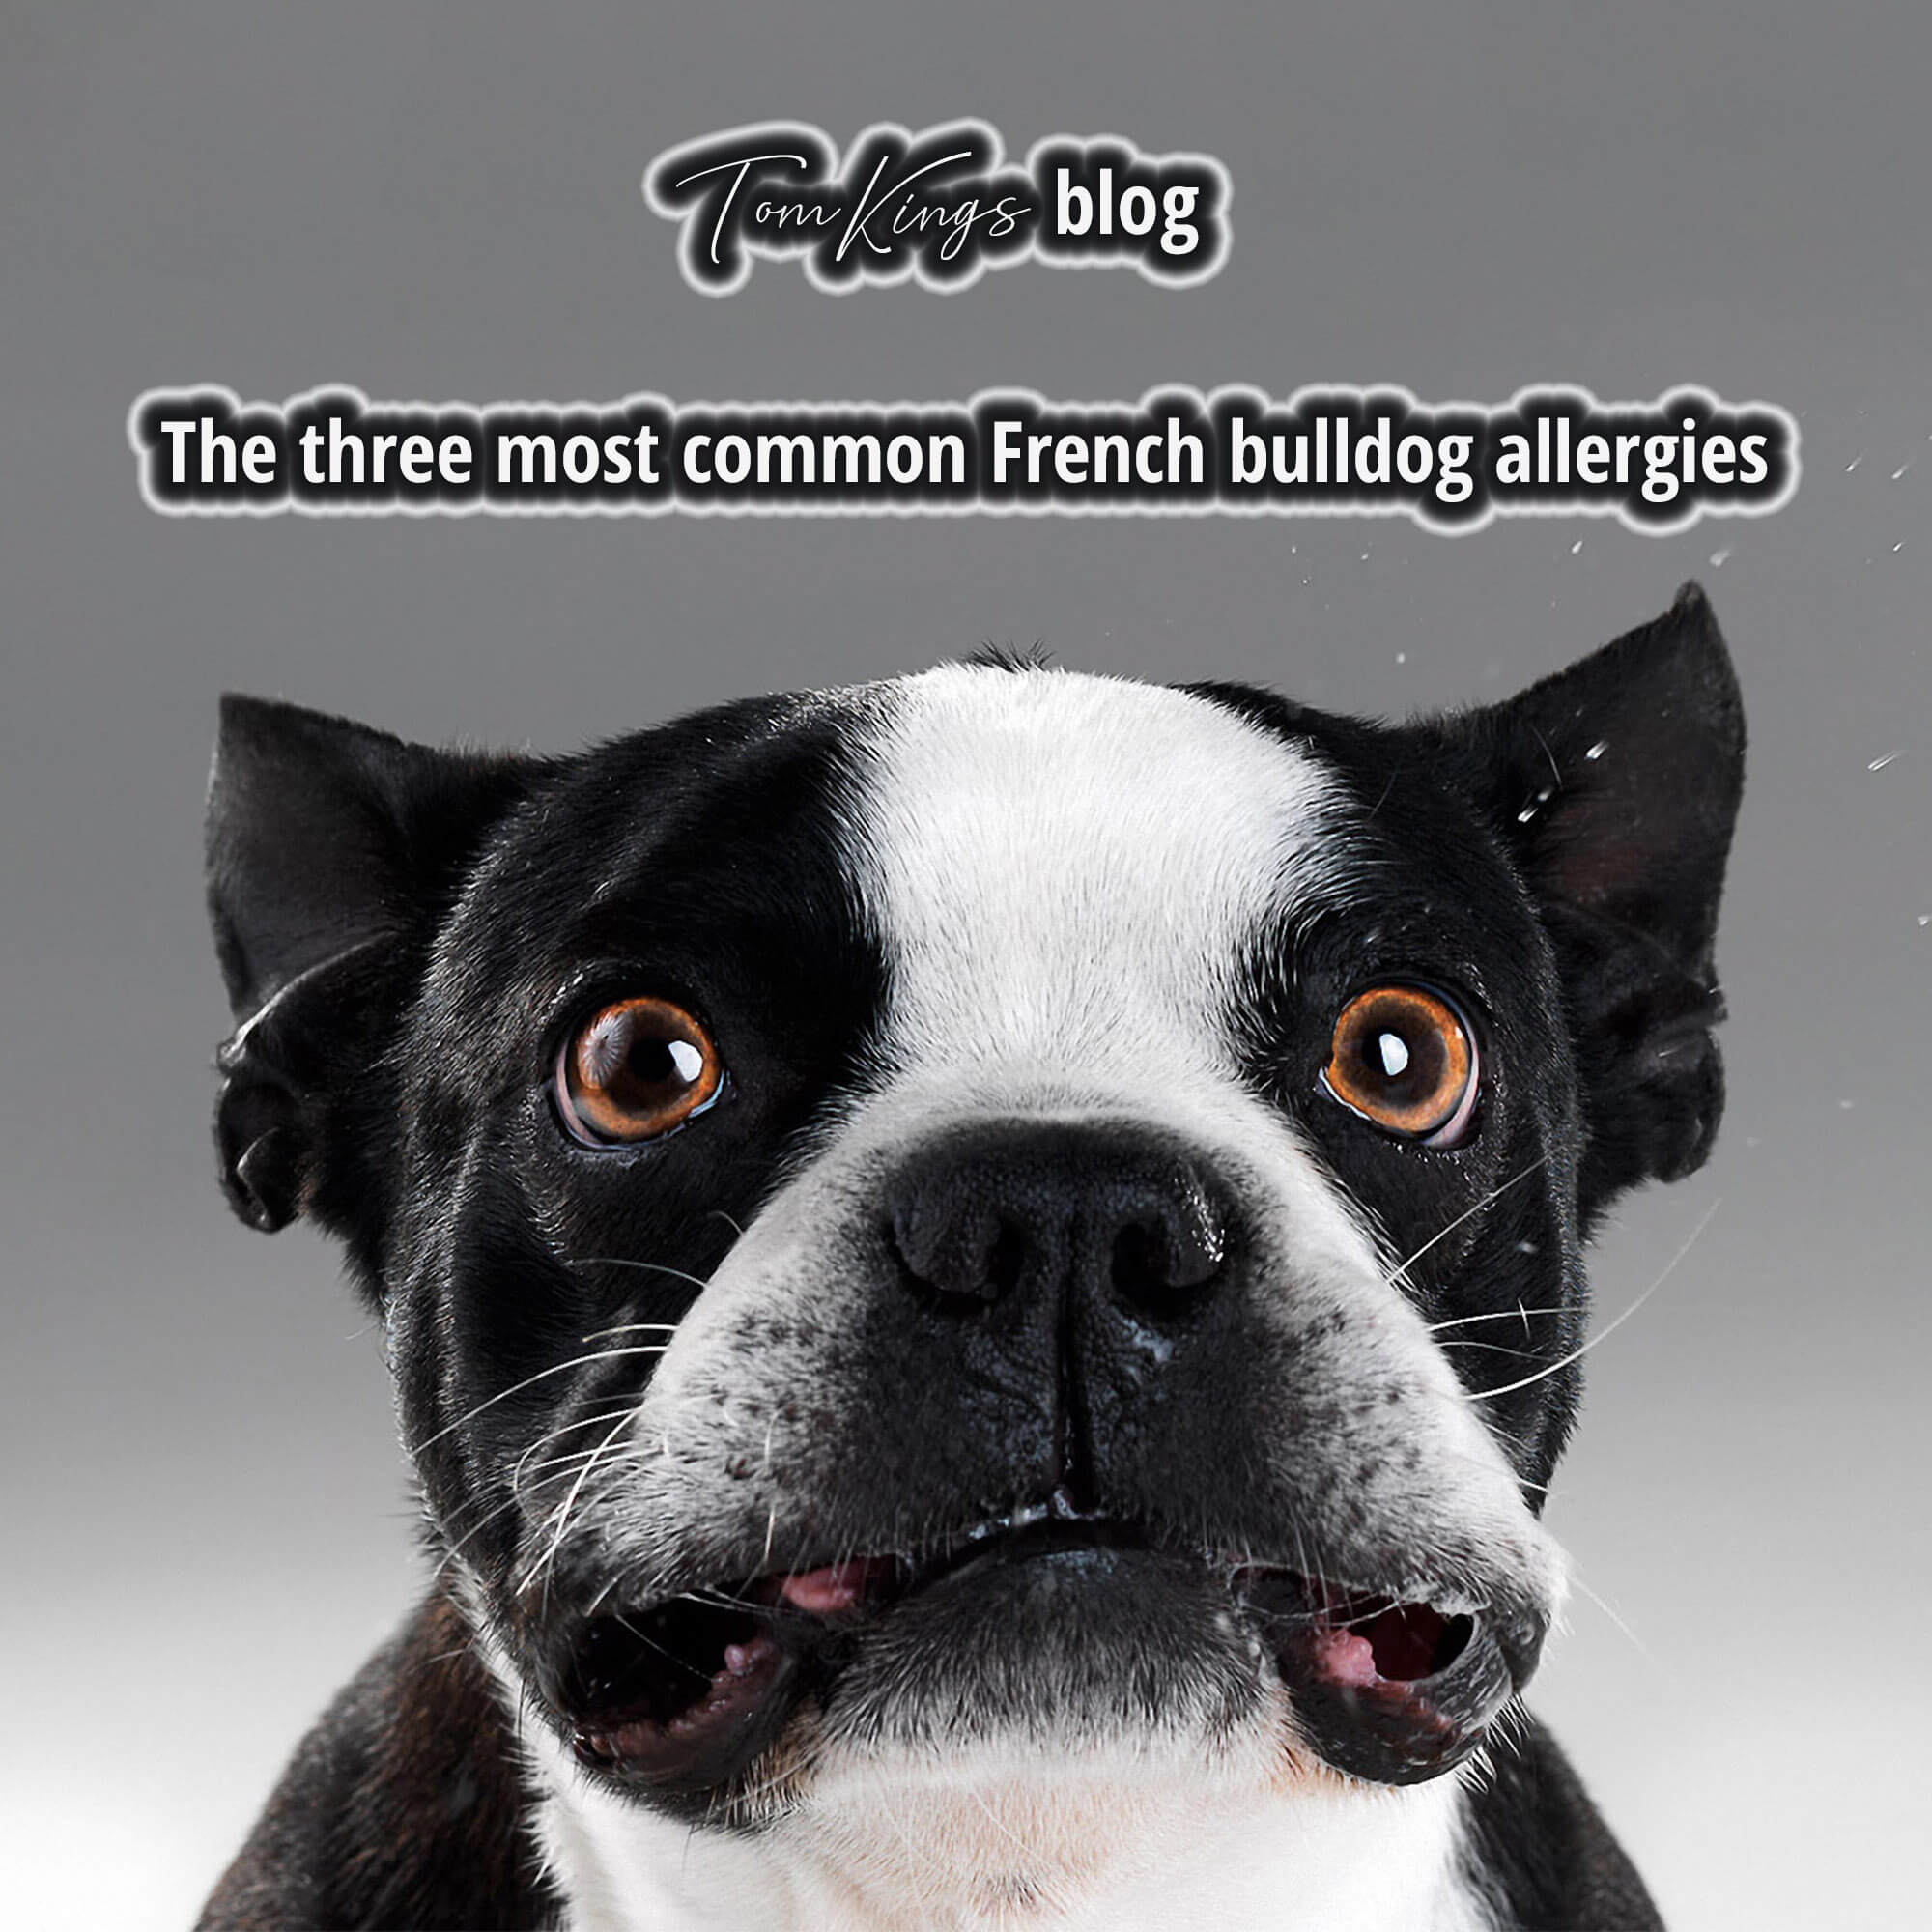 are french bulldogs good with allergies